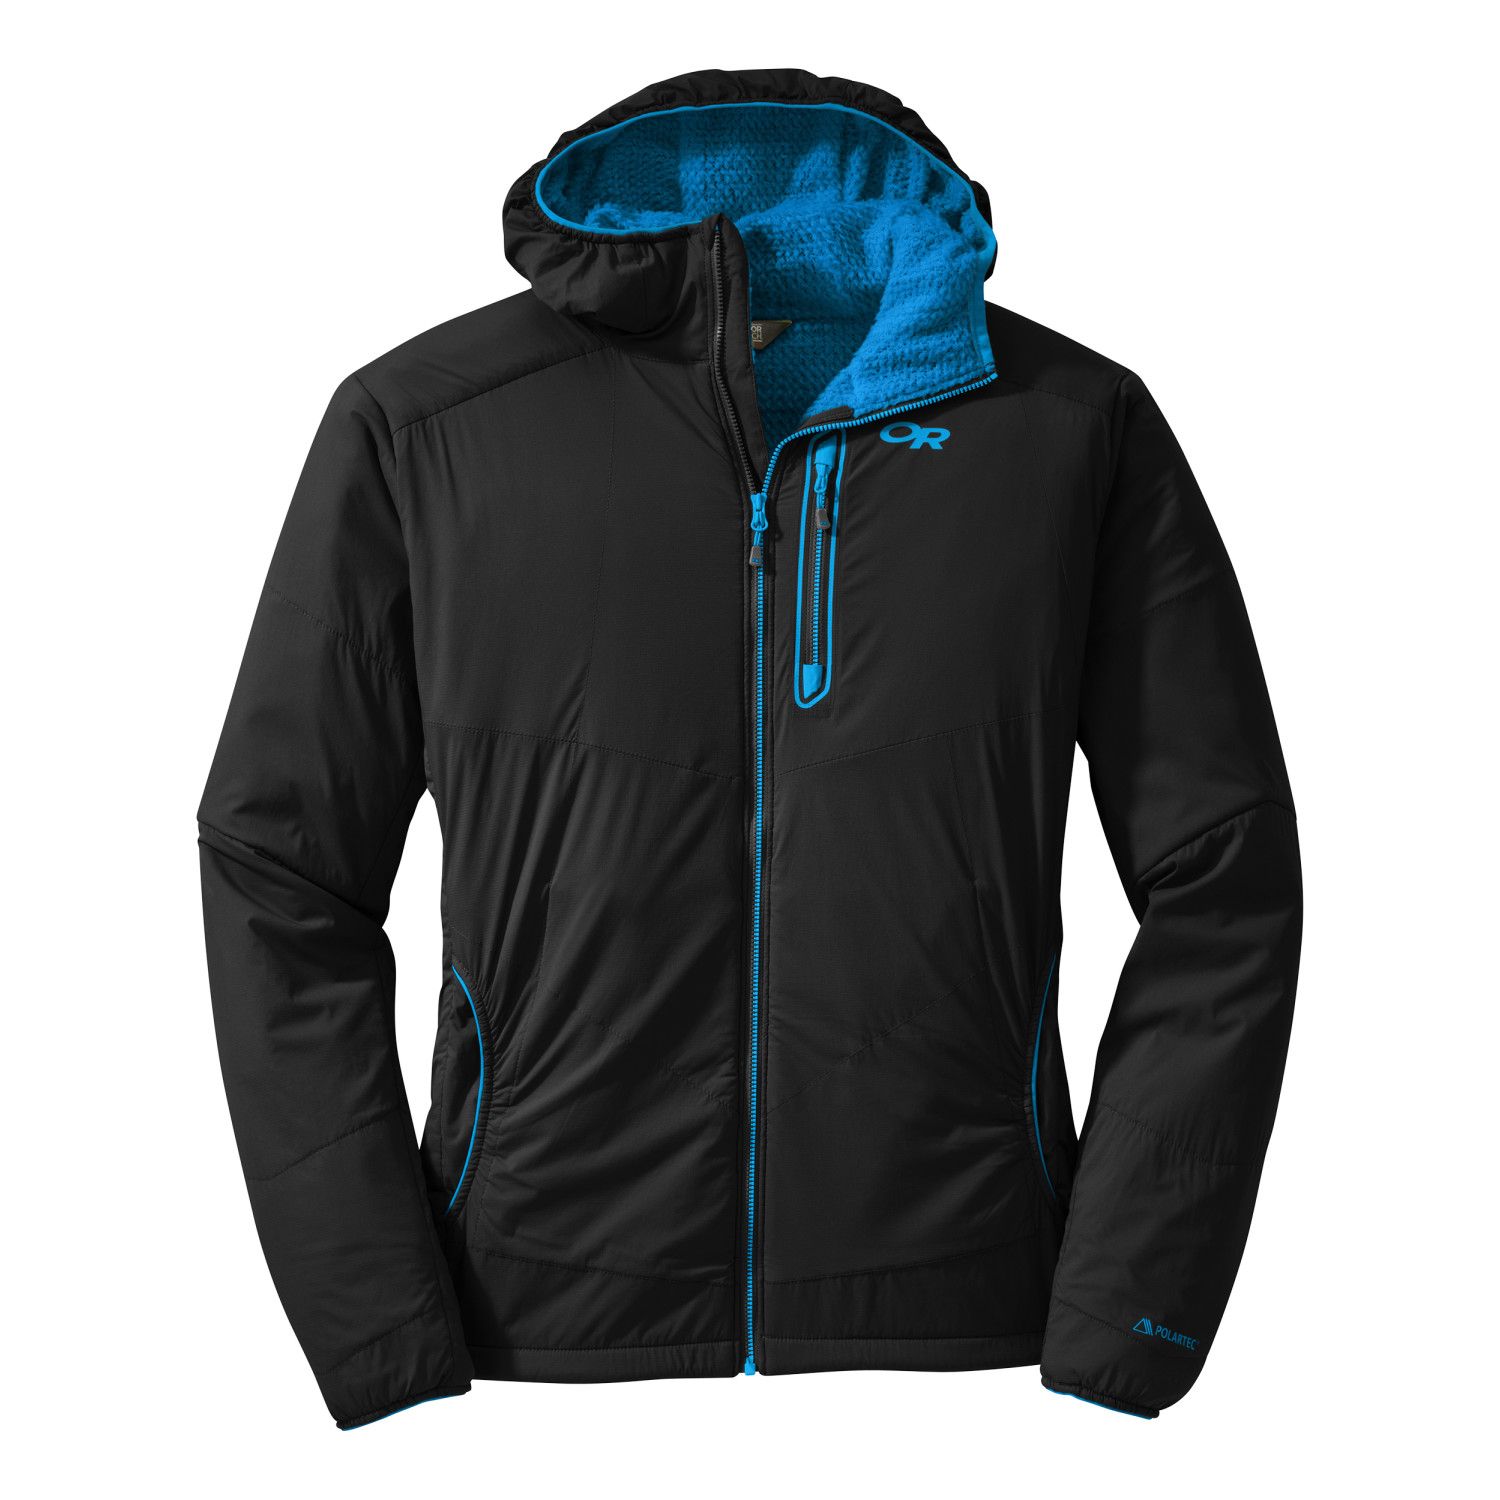 outdoor research uberlayer jacket review